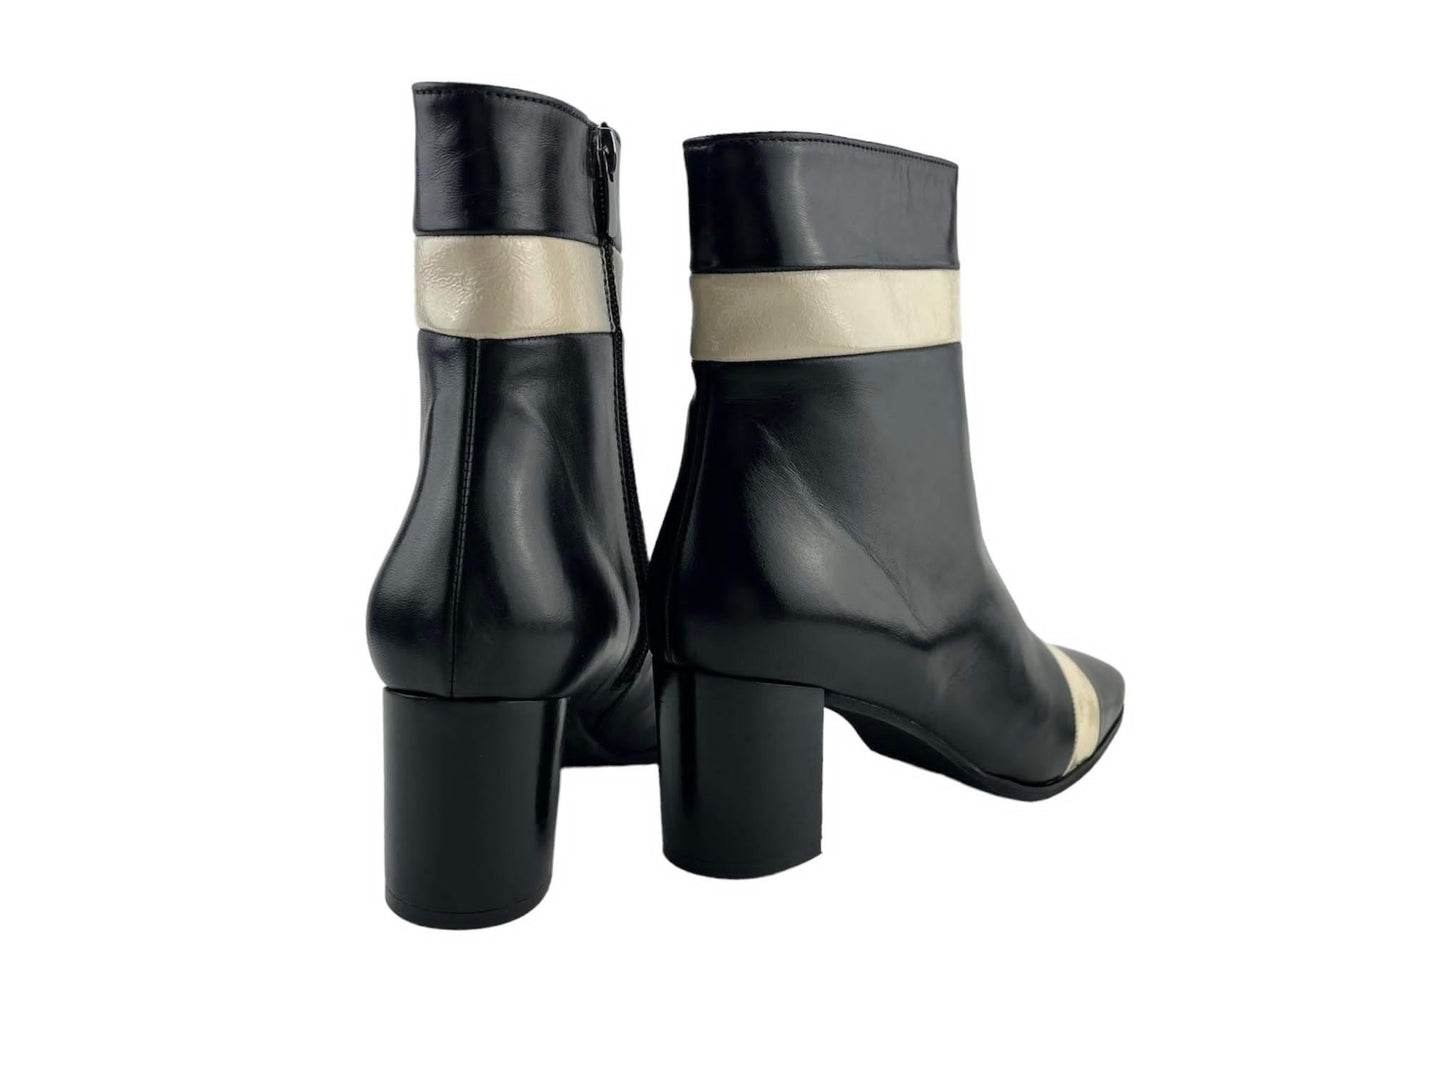 Plumers Menorca | Handmade black leather ankle boot with white stripes Addaya